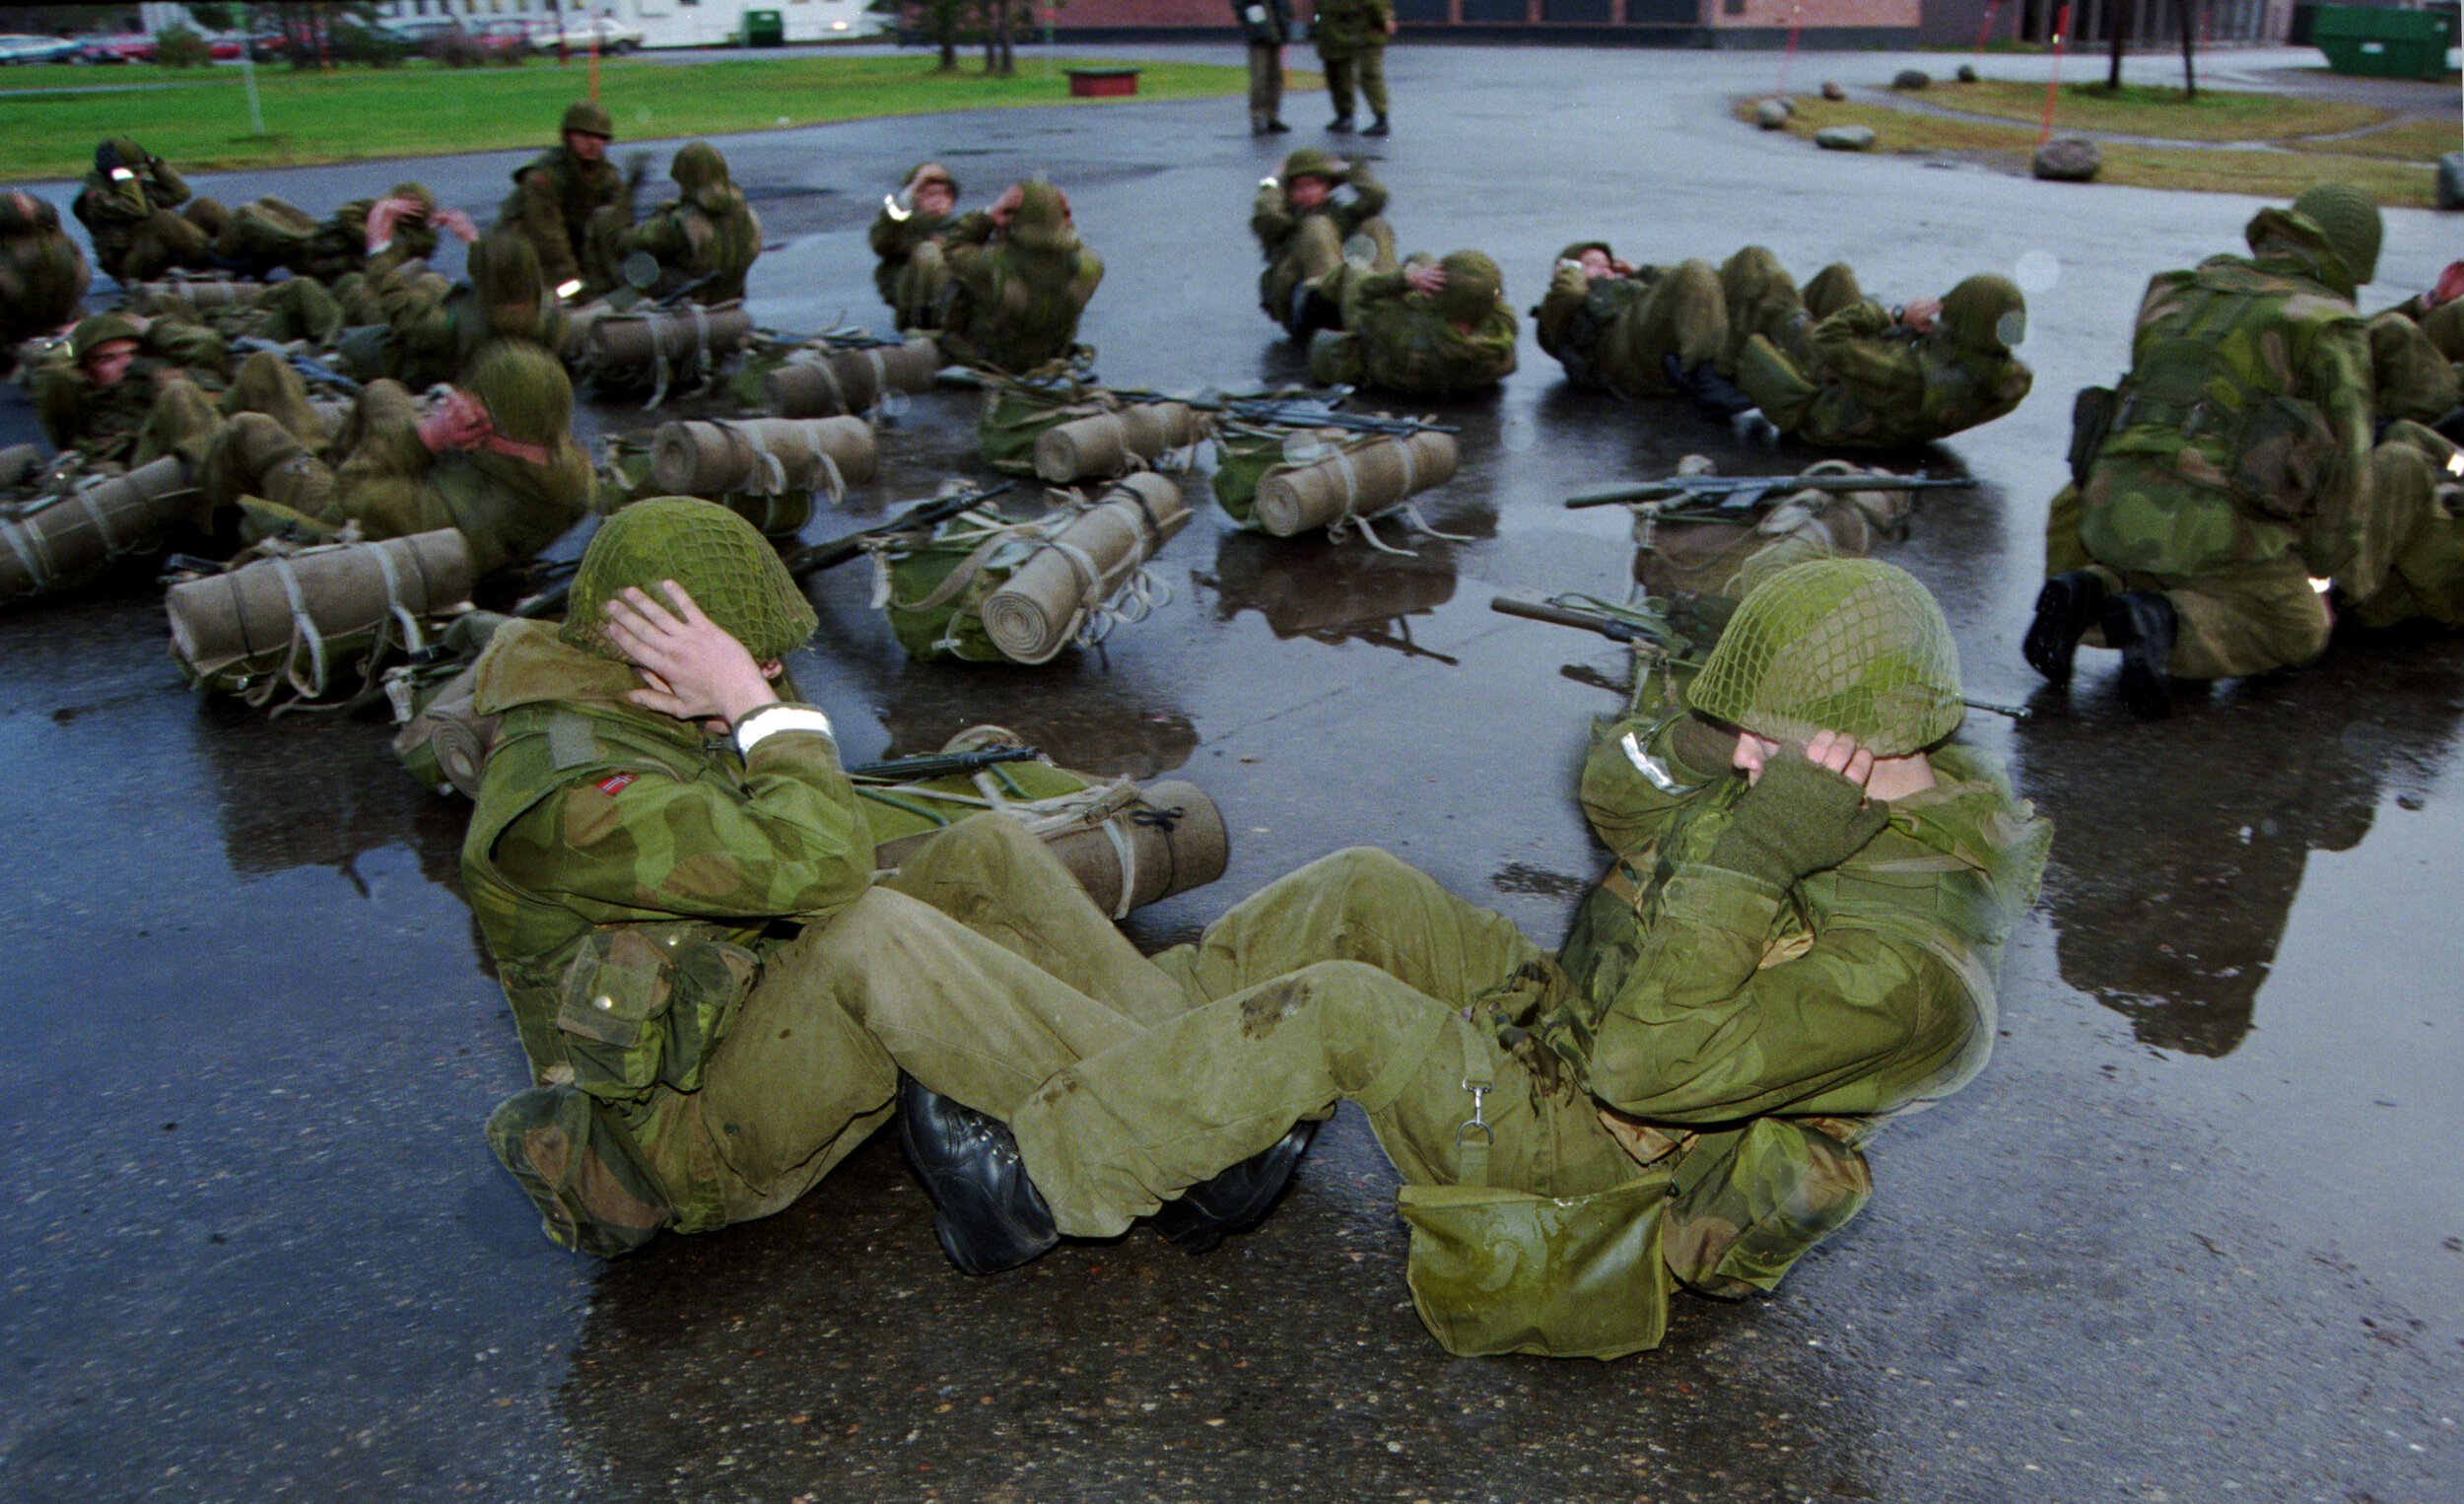  Troops doing physical training in Skjold, Norway 